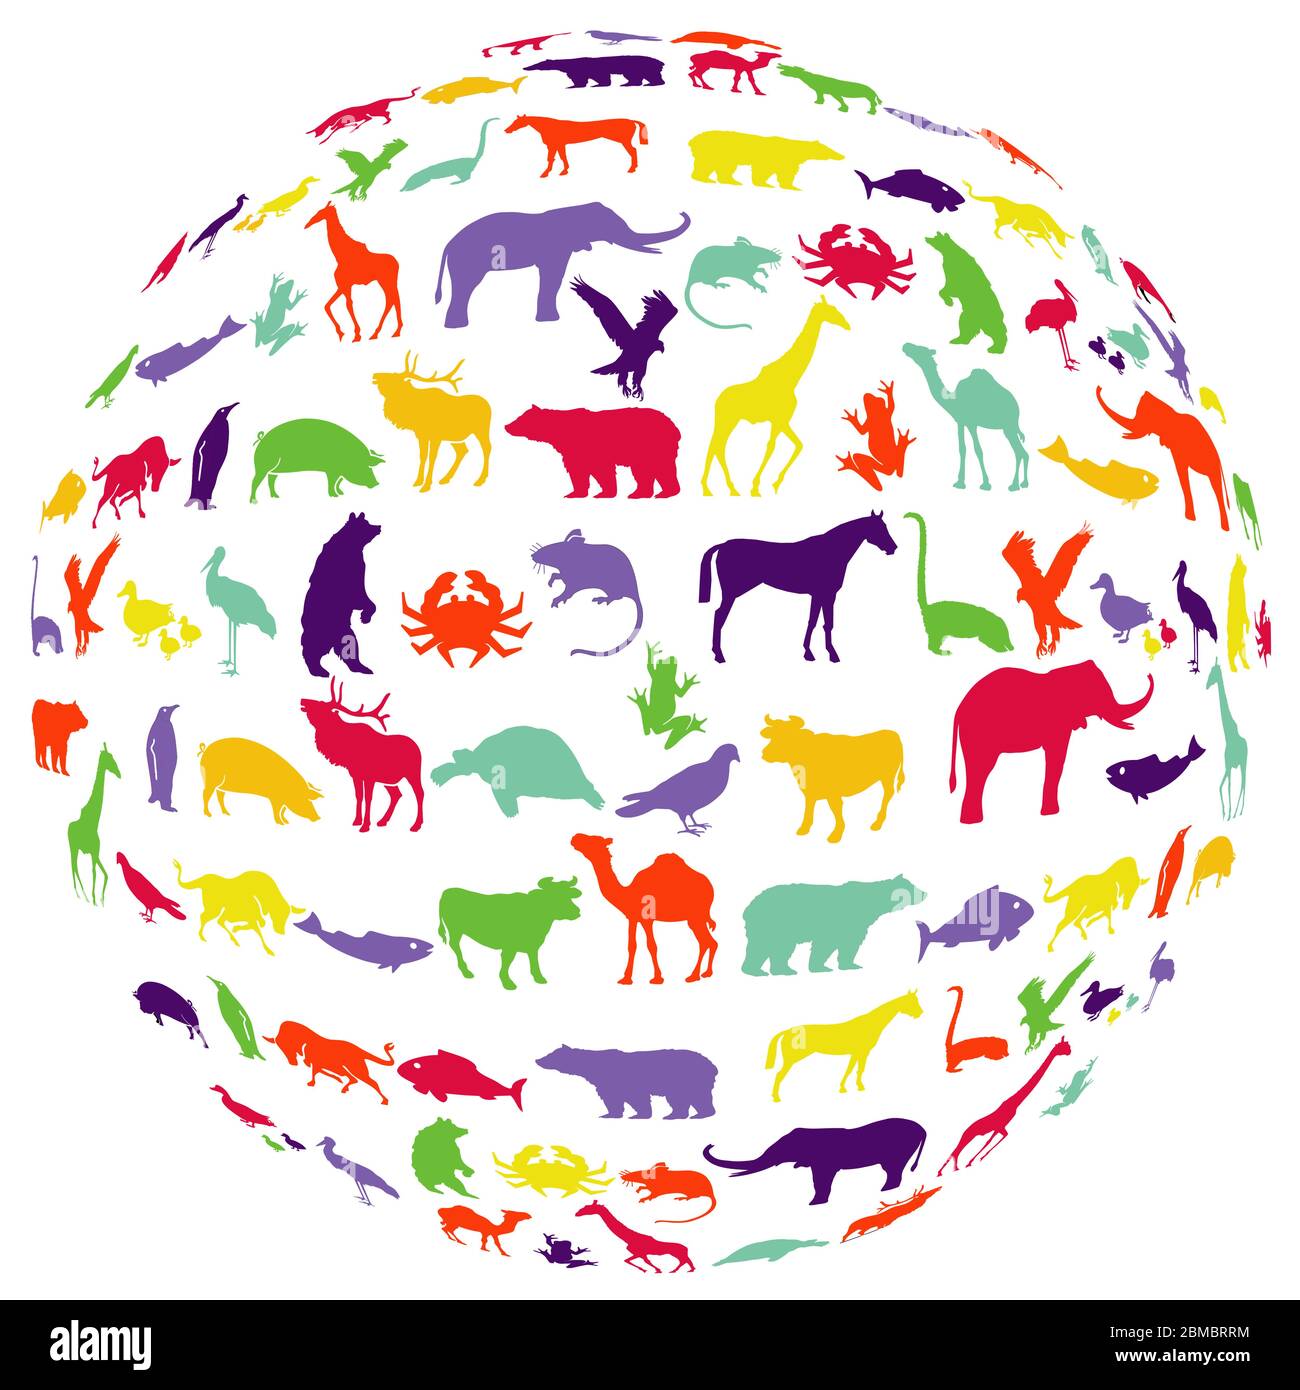 wildlife conservation, animal protection worldwide Stock Vector